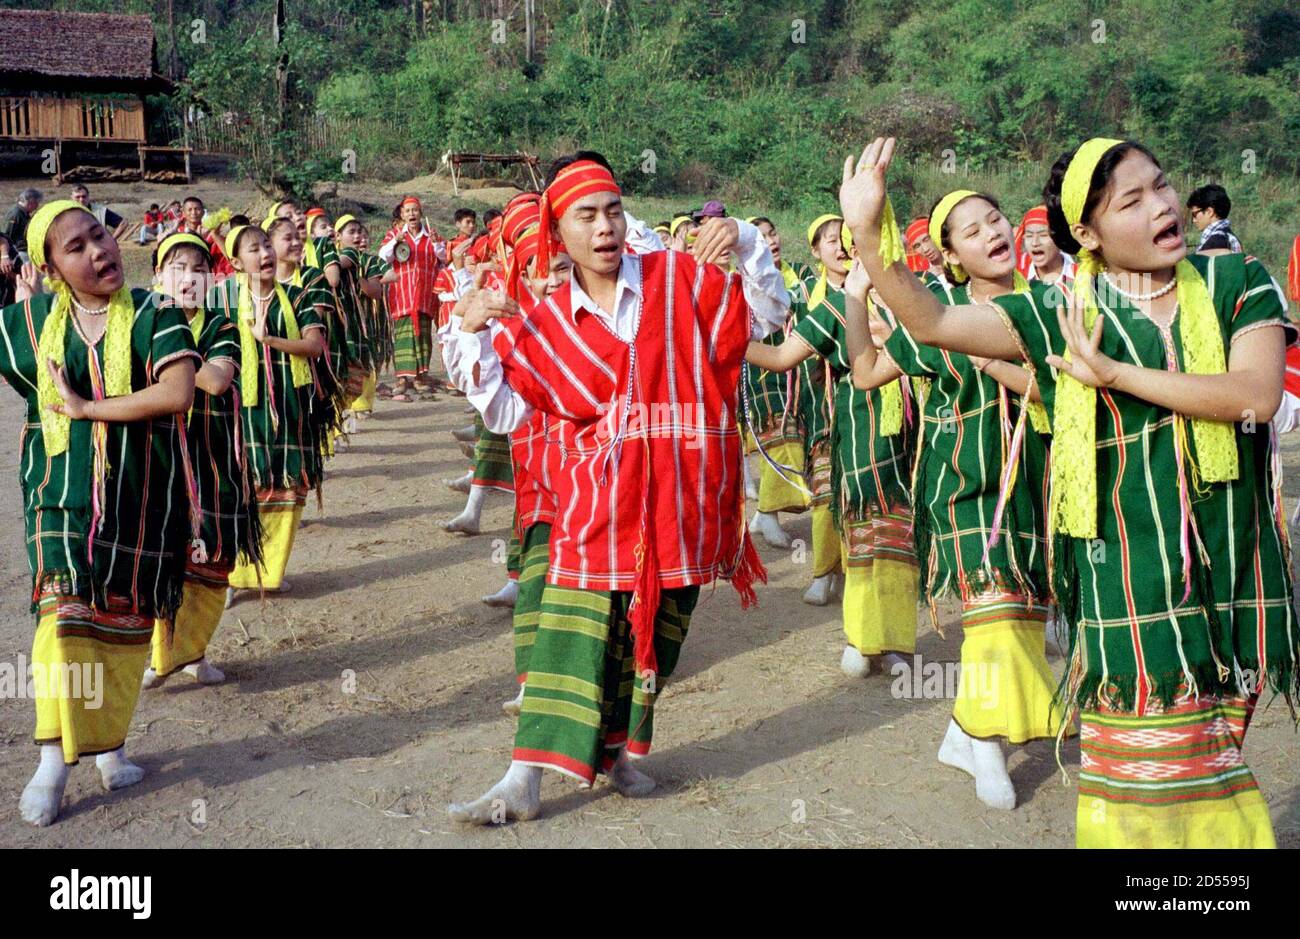 Traditional Karen dancers perform during the celebrations of the Karen National Union (KNU) 50th year of fighting for an autonomous state in the [military] base of Tadoh Thutan on the bank of the Moei river in eastern Myanmar January 31. The KNU is one of the only ethnic groups in Myanmar that has not entered into a ceasefire agreement with the SPDC (State Peace and Development Council, formerly SLORC) [military] regime in Yangon. Stock Photo